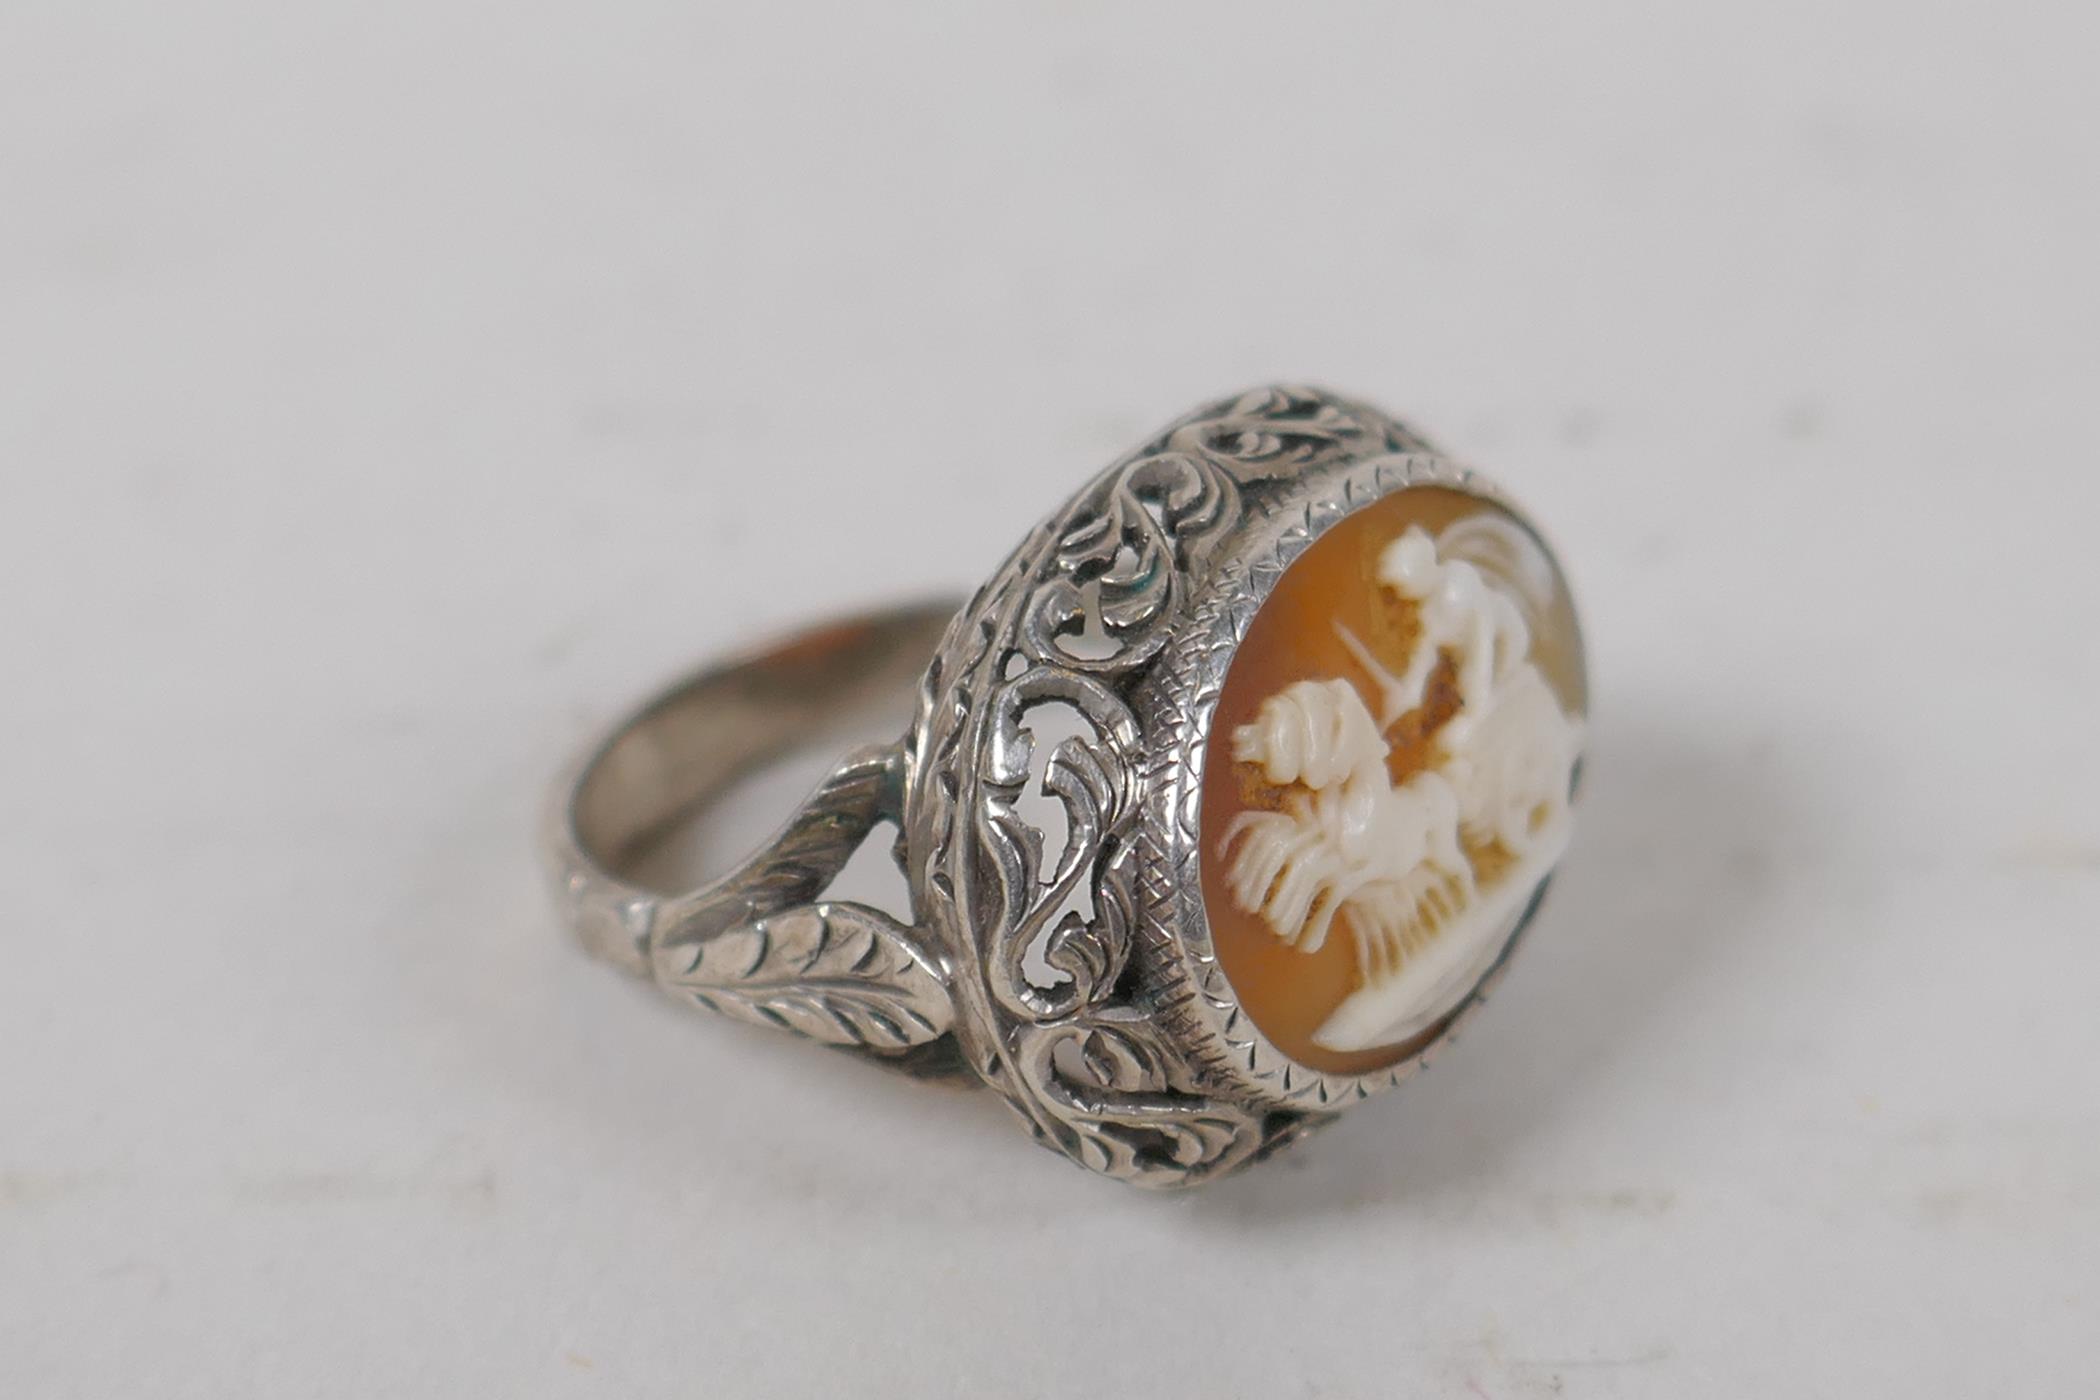 An antique silver cameo bracelet with Greco Roman decorative panels, and a matching ring, size L/M - Image 6 of 6